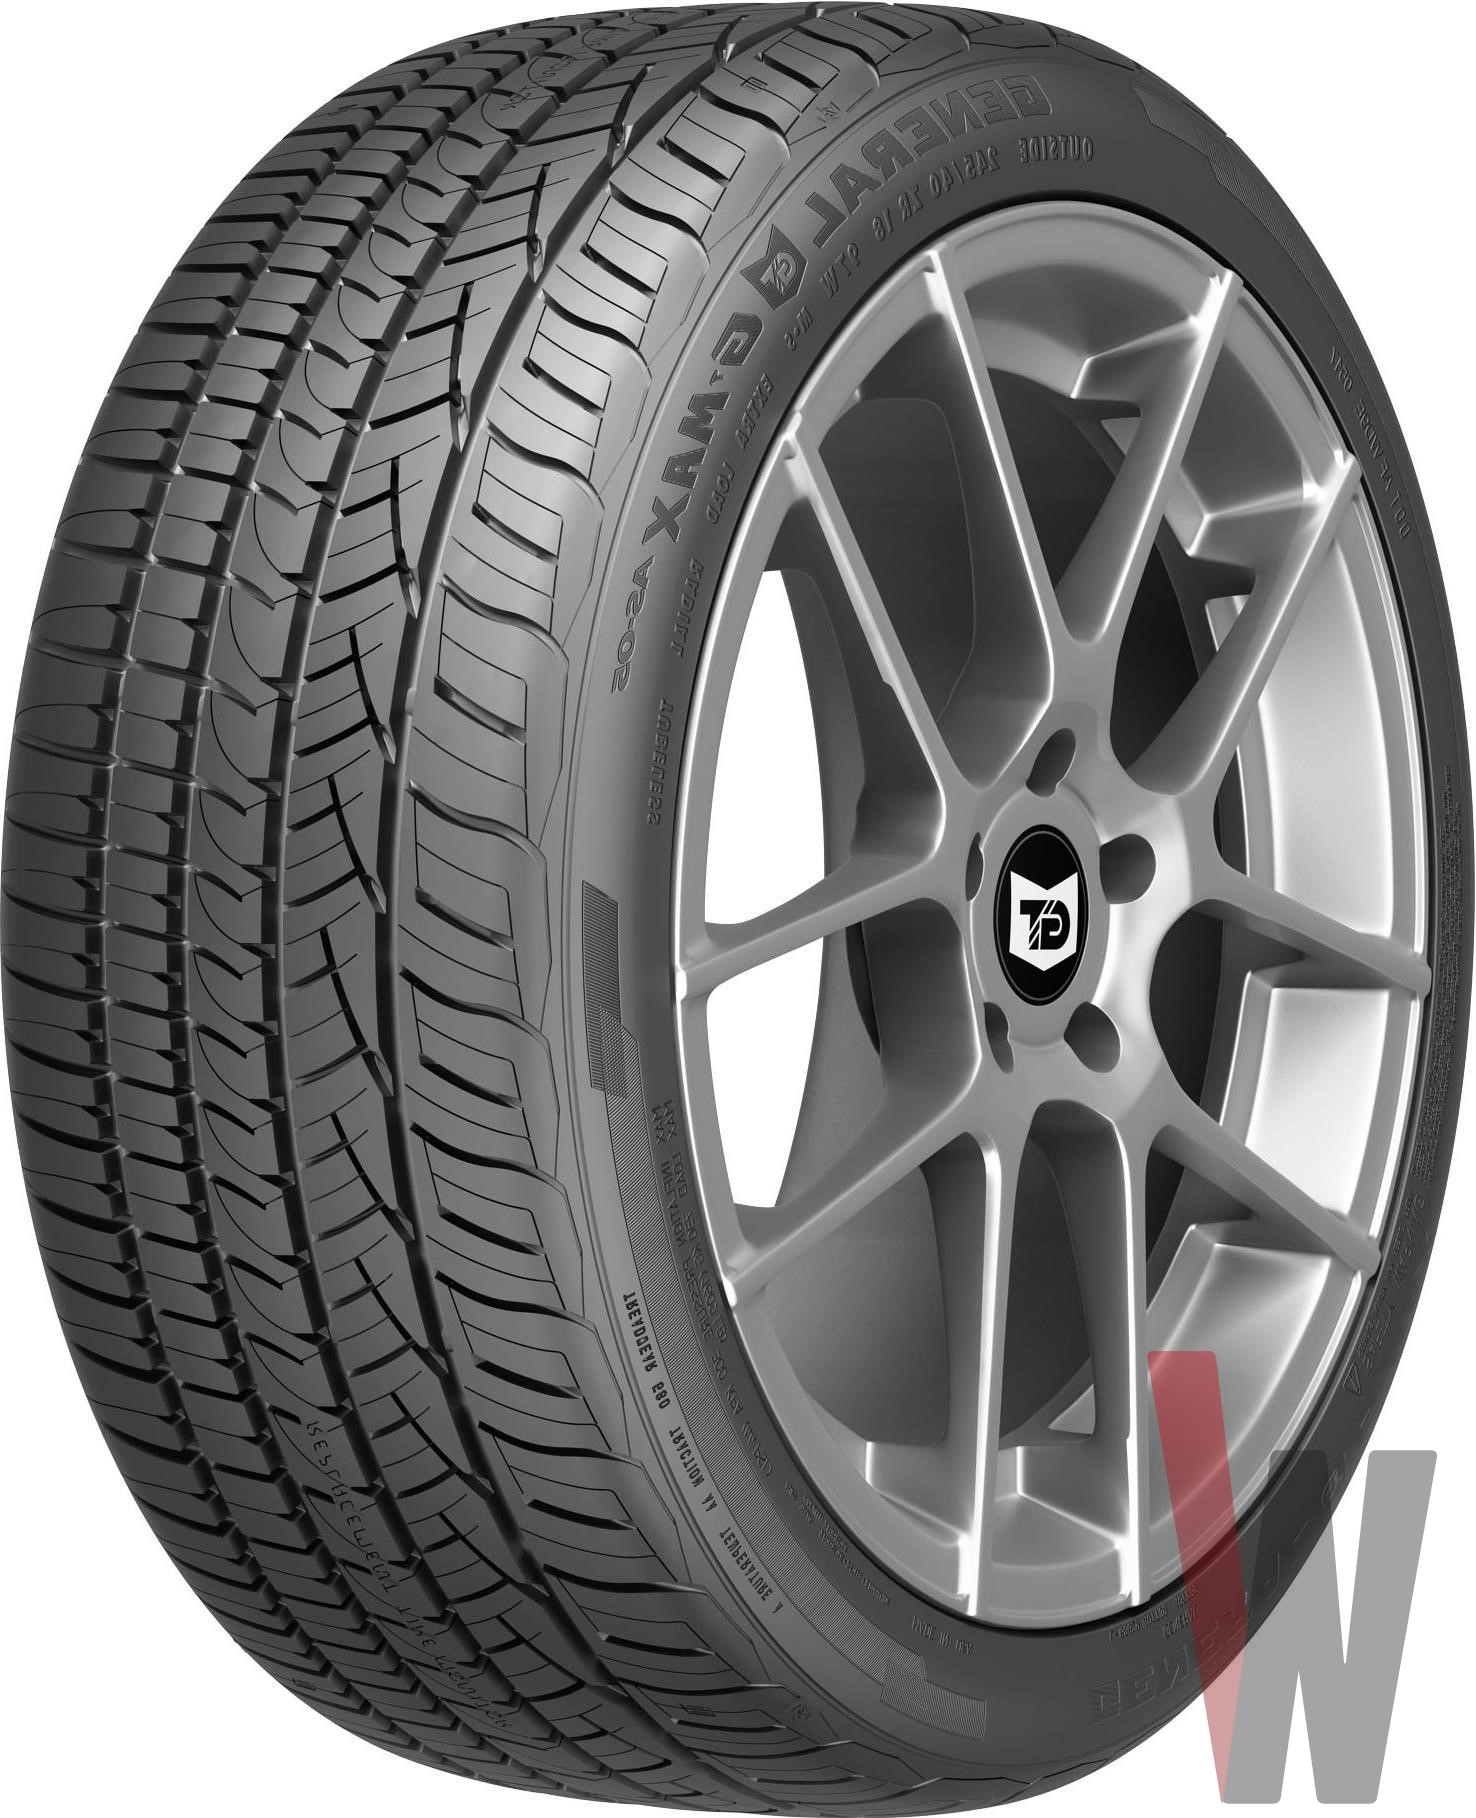 General Tire G-MAX AS-05 size-245/35.0R20.00 load rating- 95 speed 